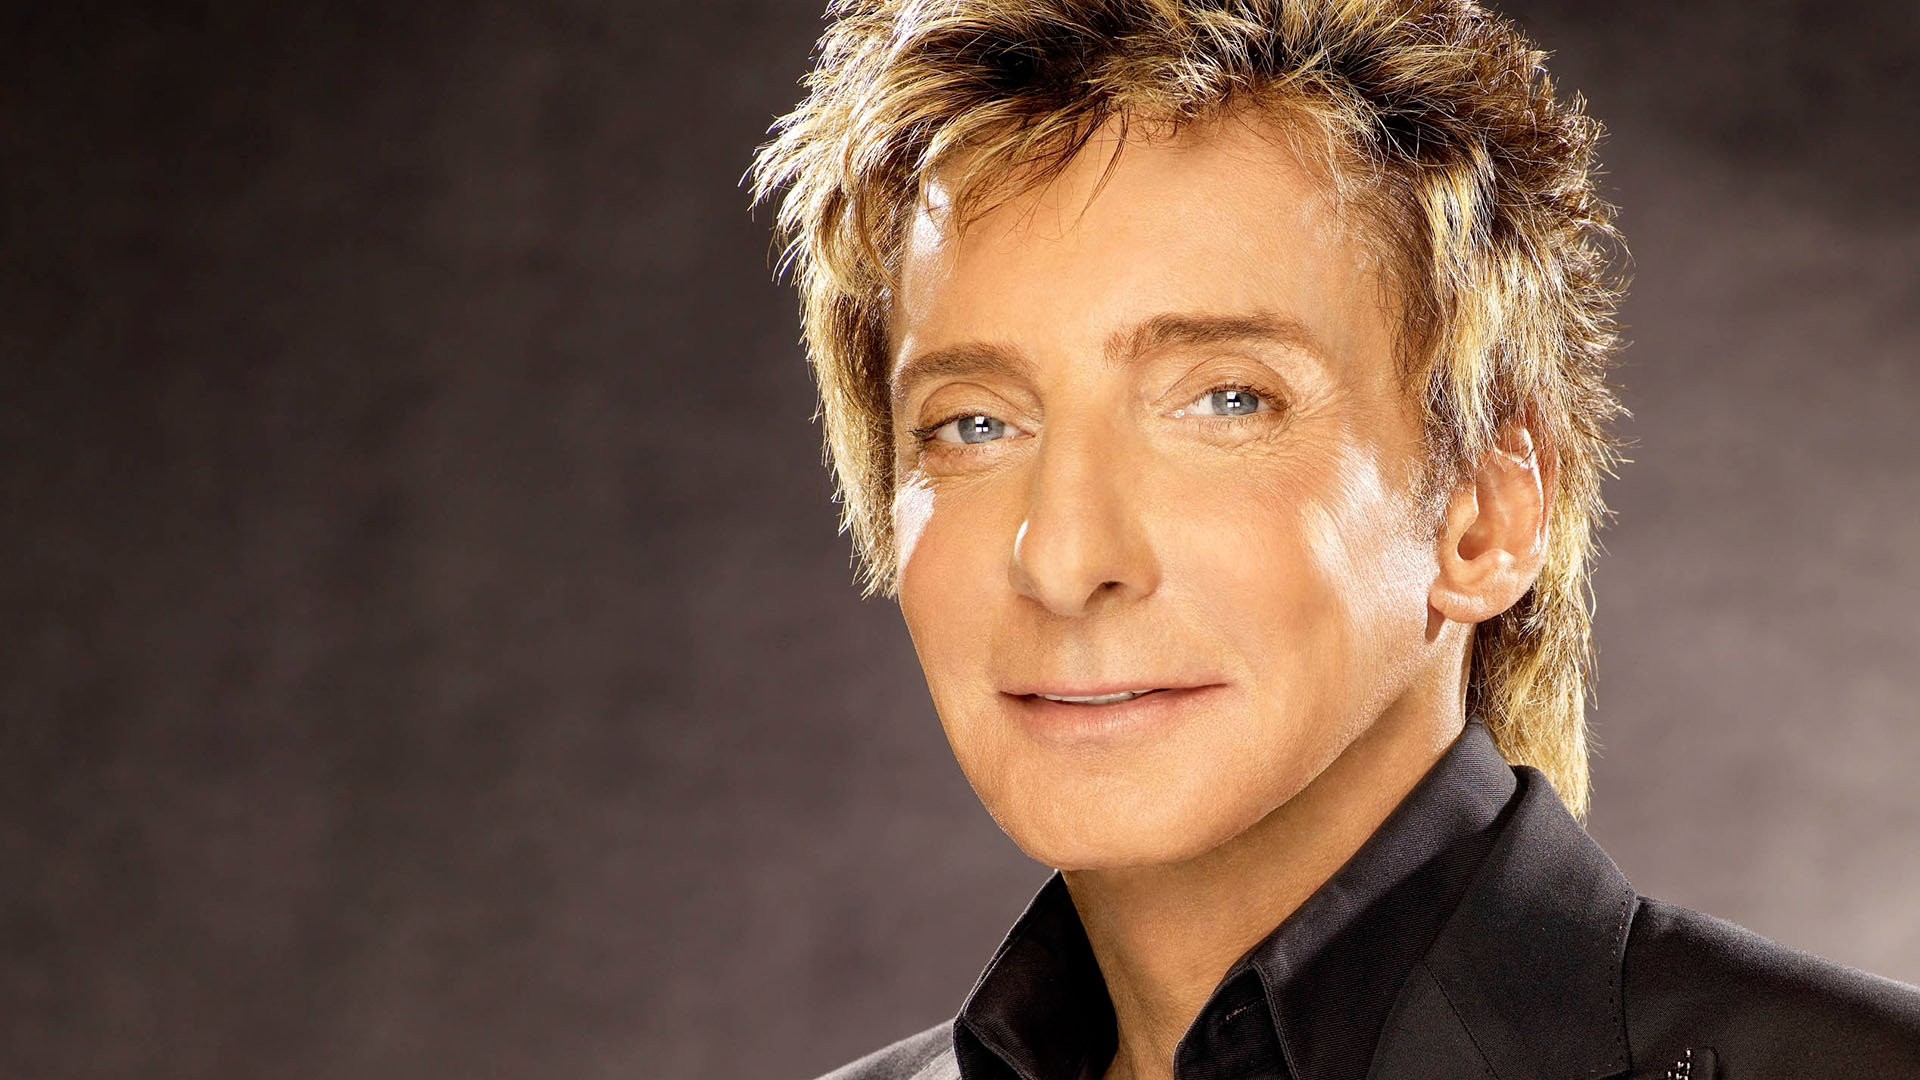 Barry Manilow announces he'll hit the road One Last Time - That Eric Alper